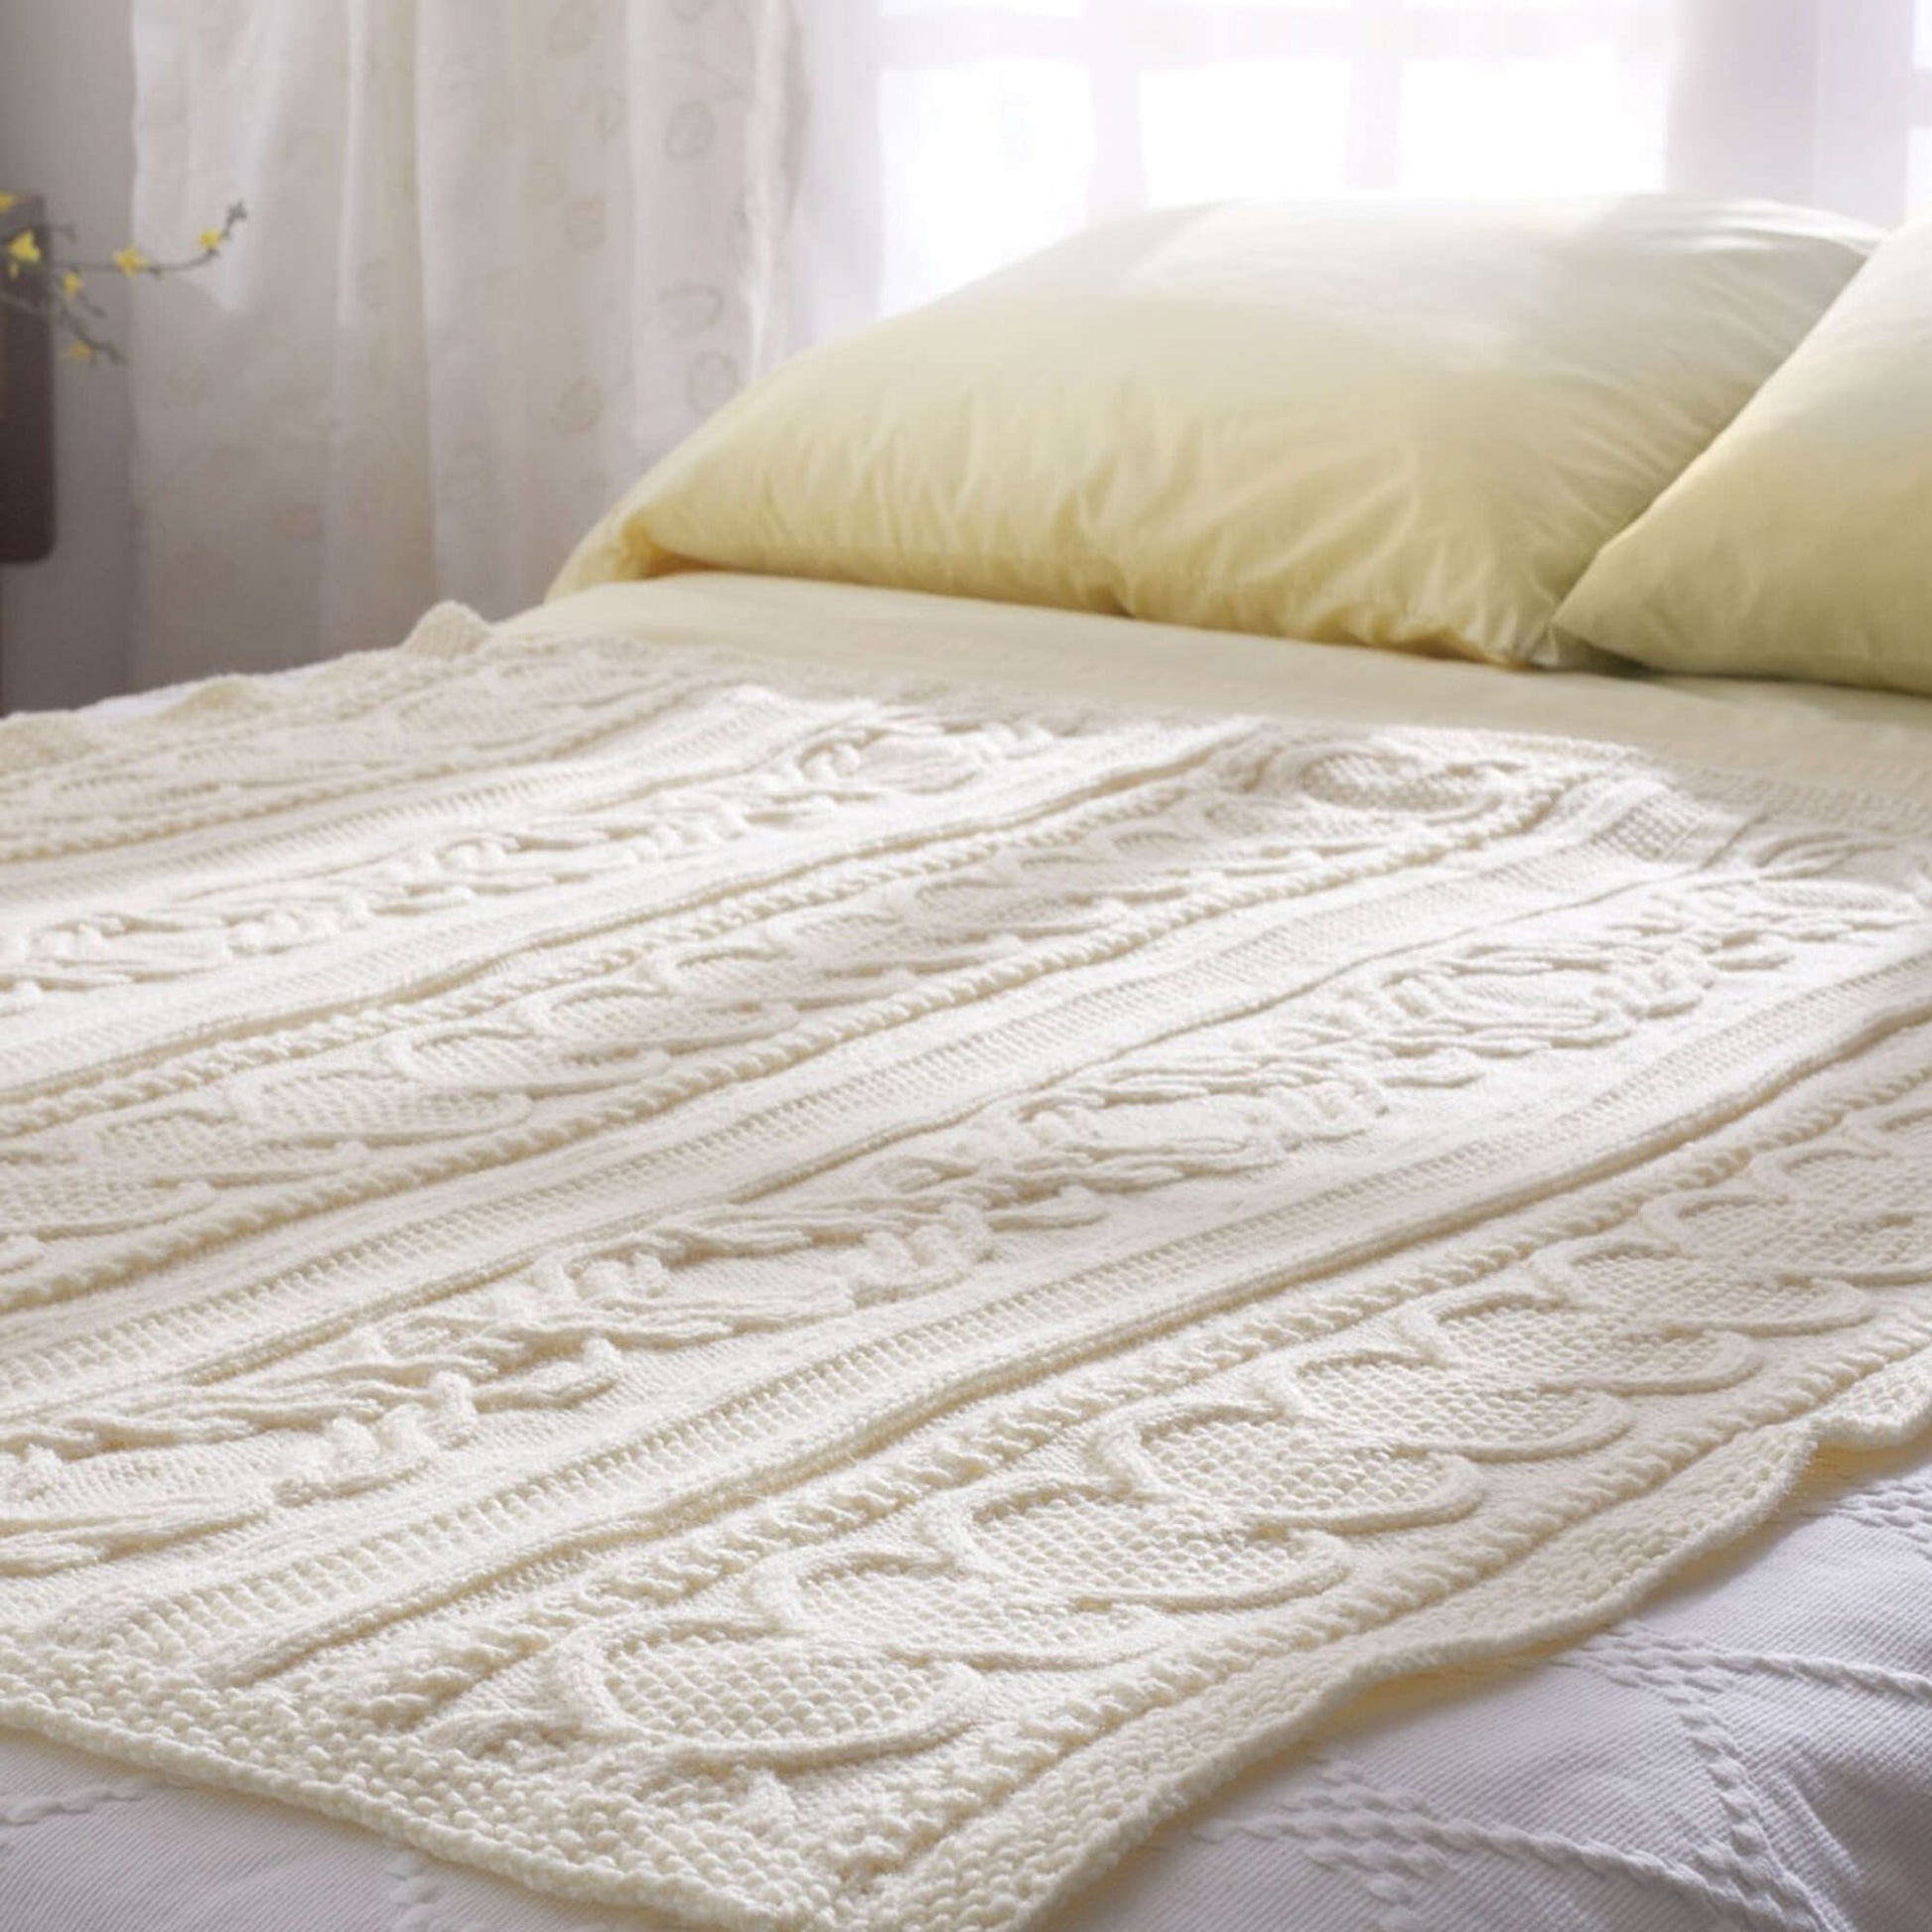 Free Bernat Knit Gift Of Love Cable Afghan Pattern